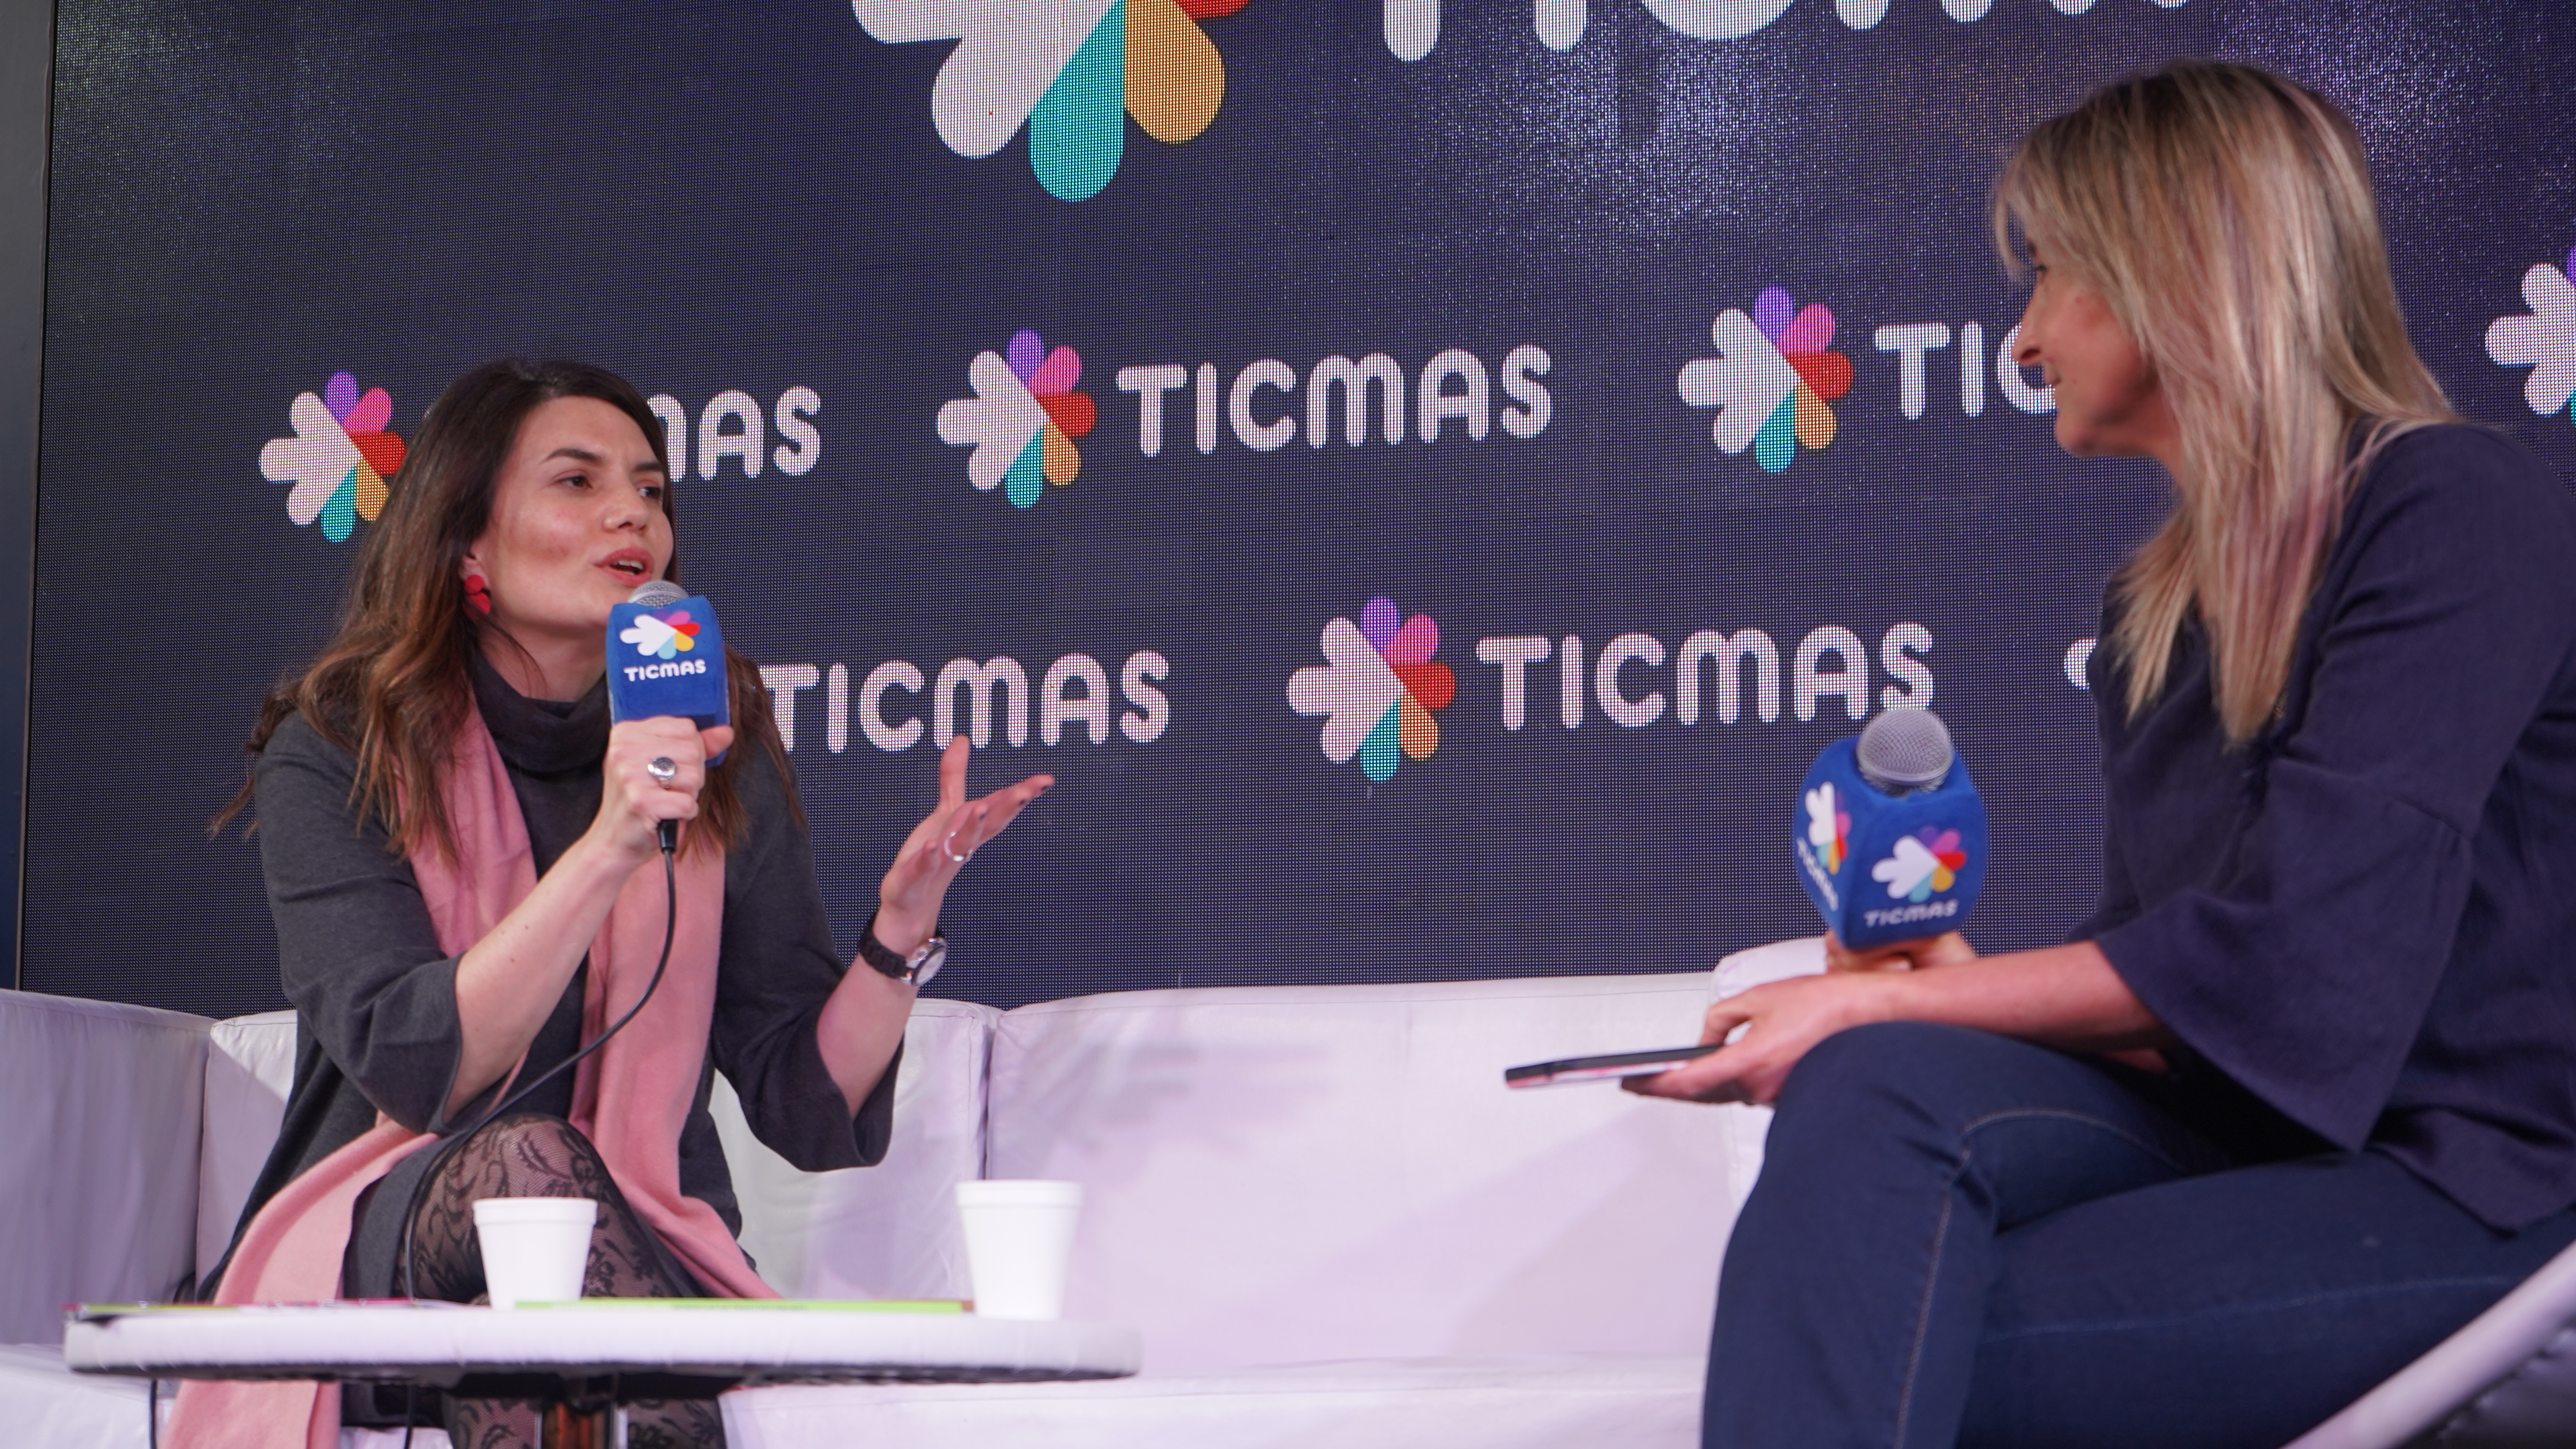 Guadalupe Diaz Costanzo, Director of C3, interviewed by Laura Marinucci at the Tecmas Hall at the Book Fair